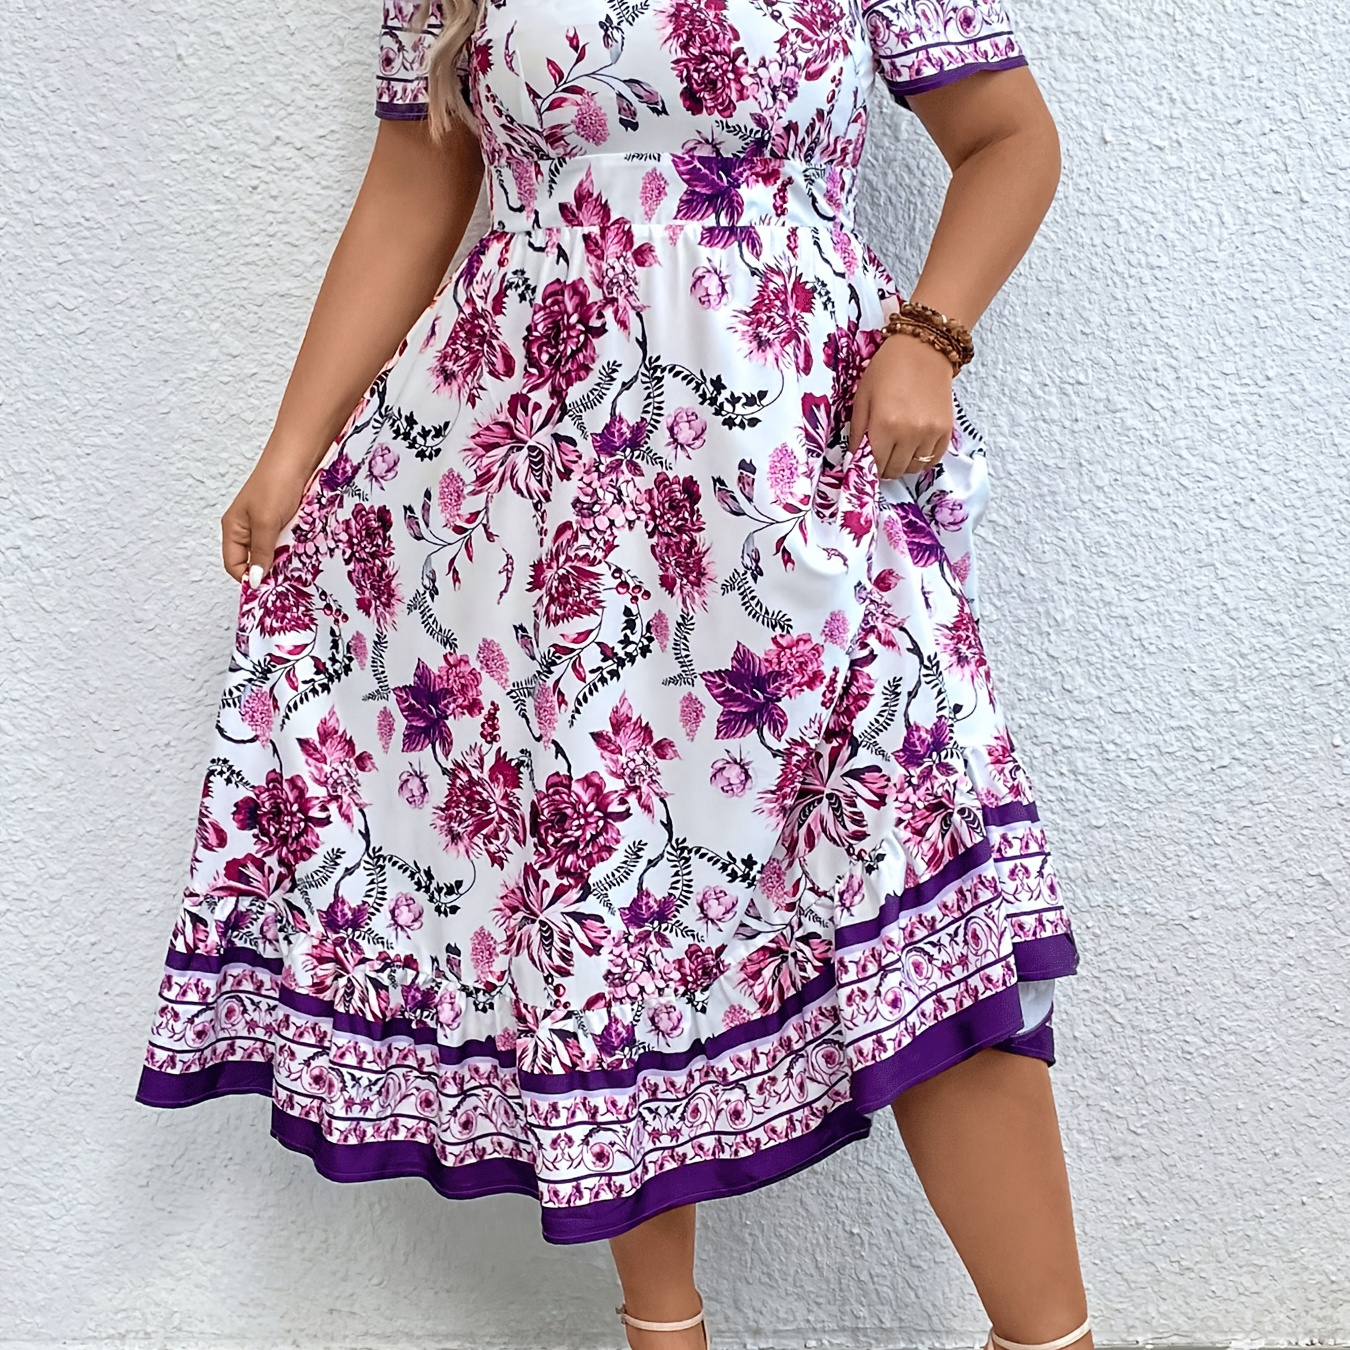 

Plus Size Floral Print Ruffle Hem Dress, Casual Short Sleeve Dress For Spring & Summer, Women's Plus Size Clothing